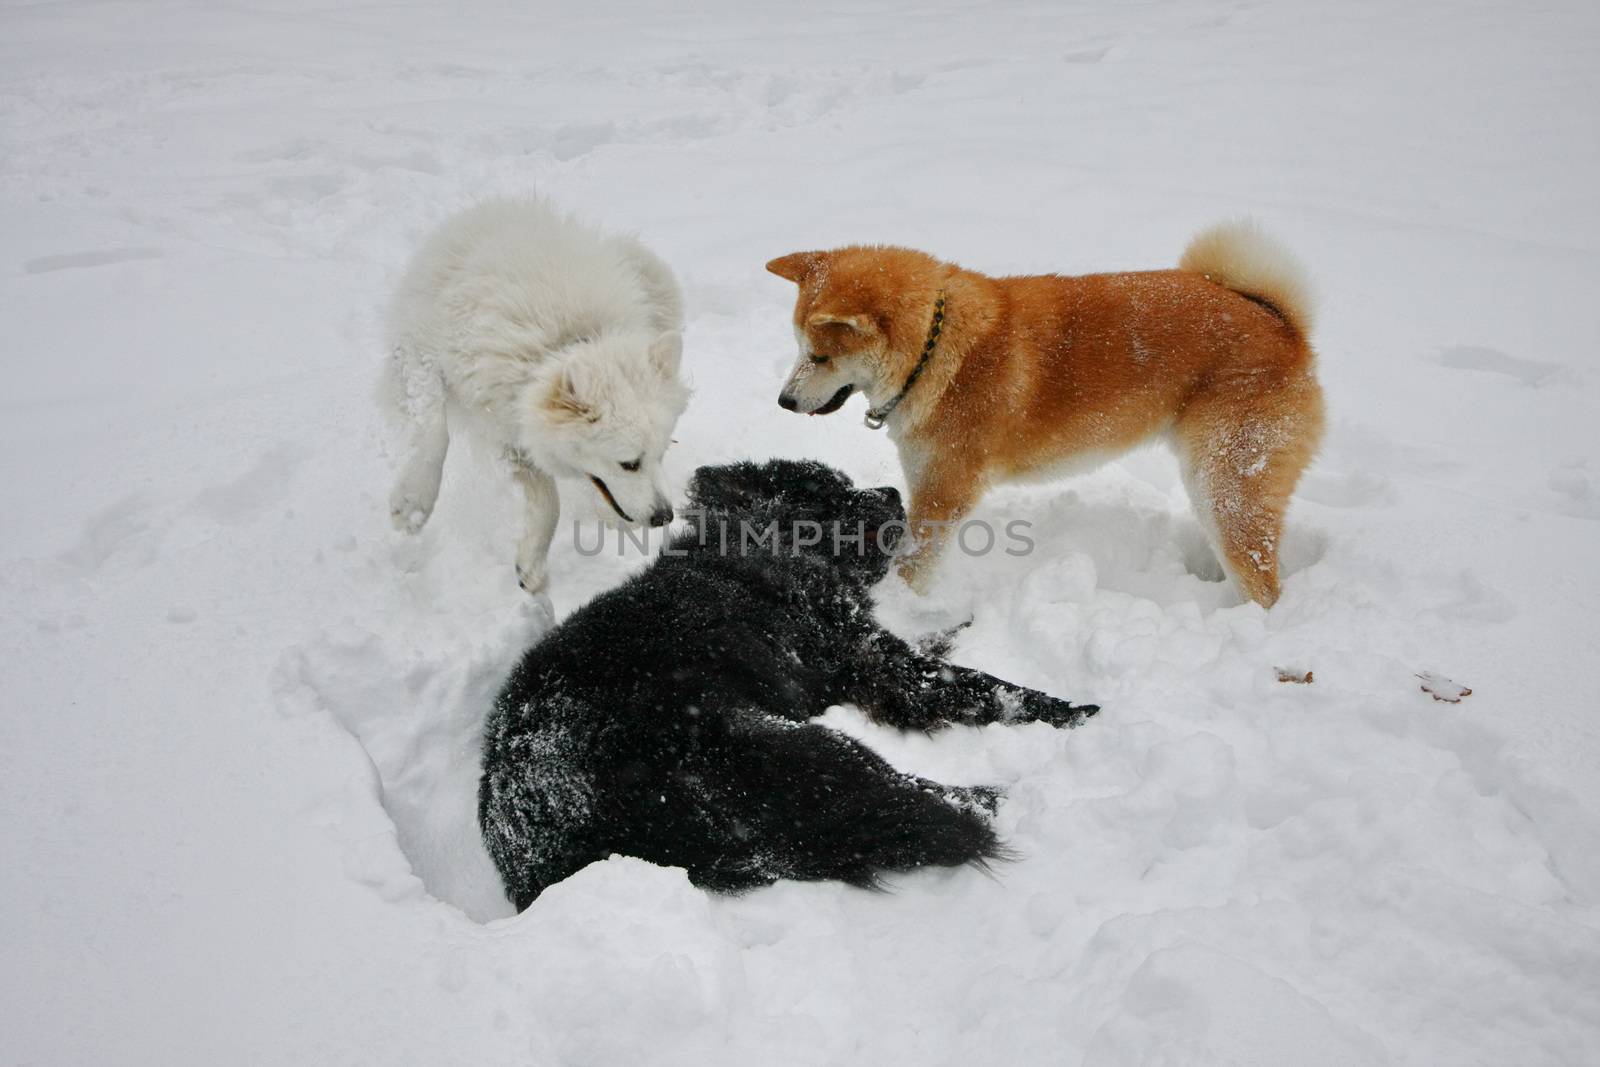 Puppies of Akita Inu, Samoyed and Newfoundlander playing in the snow